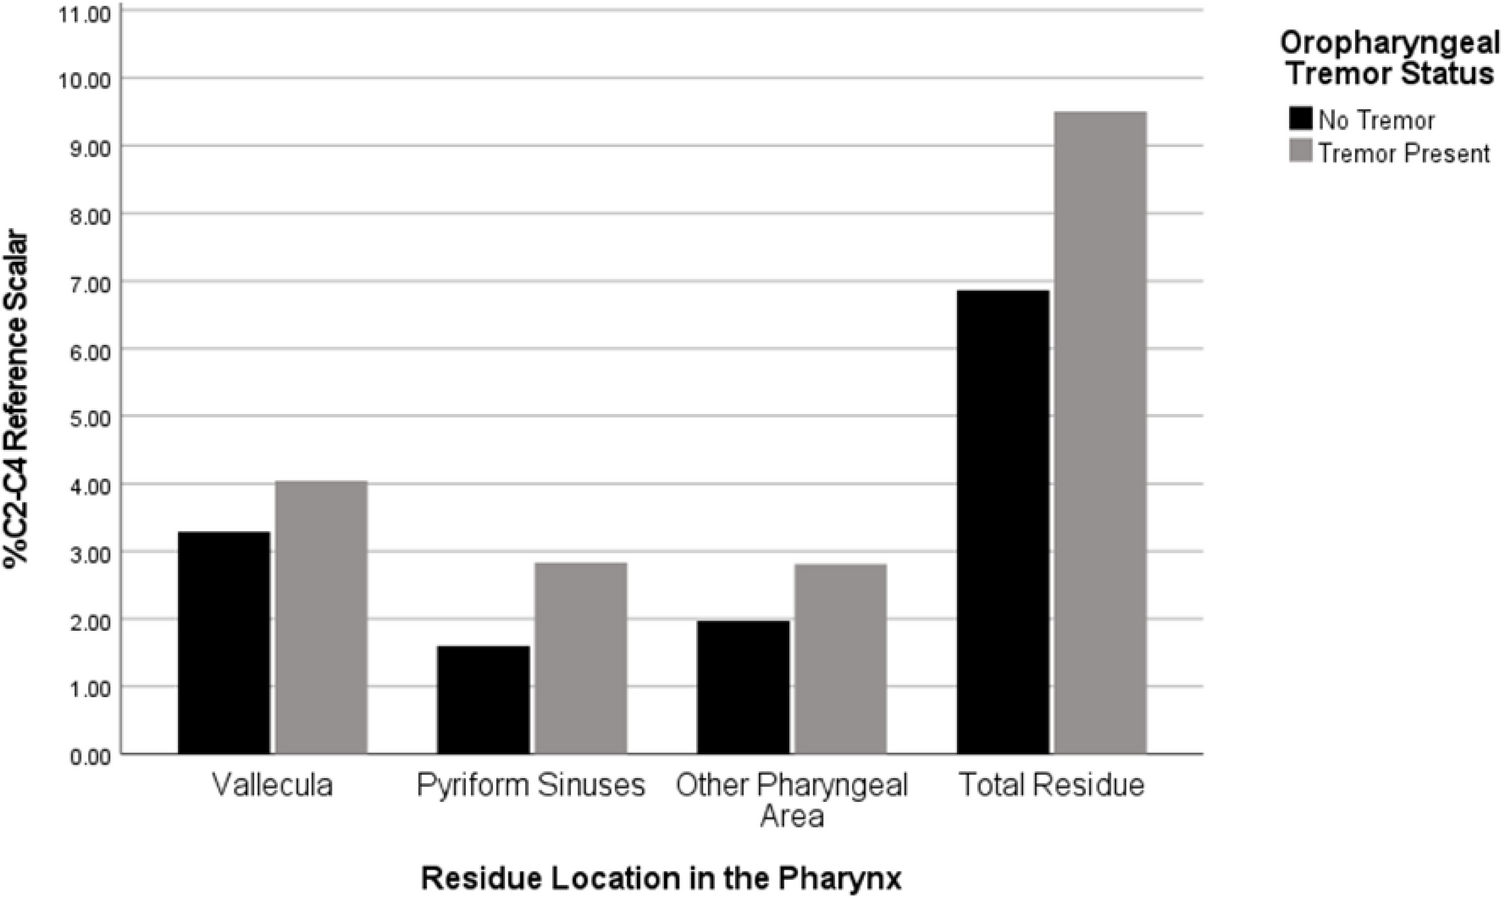 The Effect of Oropharyngeal Resting Tremor on Swallowing Function in a Clinical Cohort of People with Parkinson’s Disease